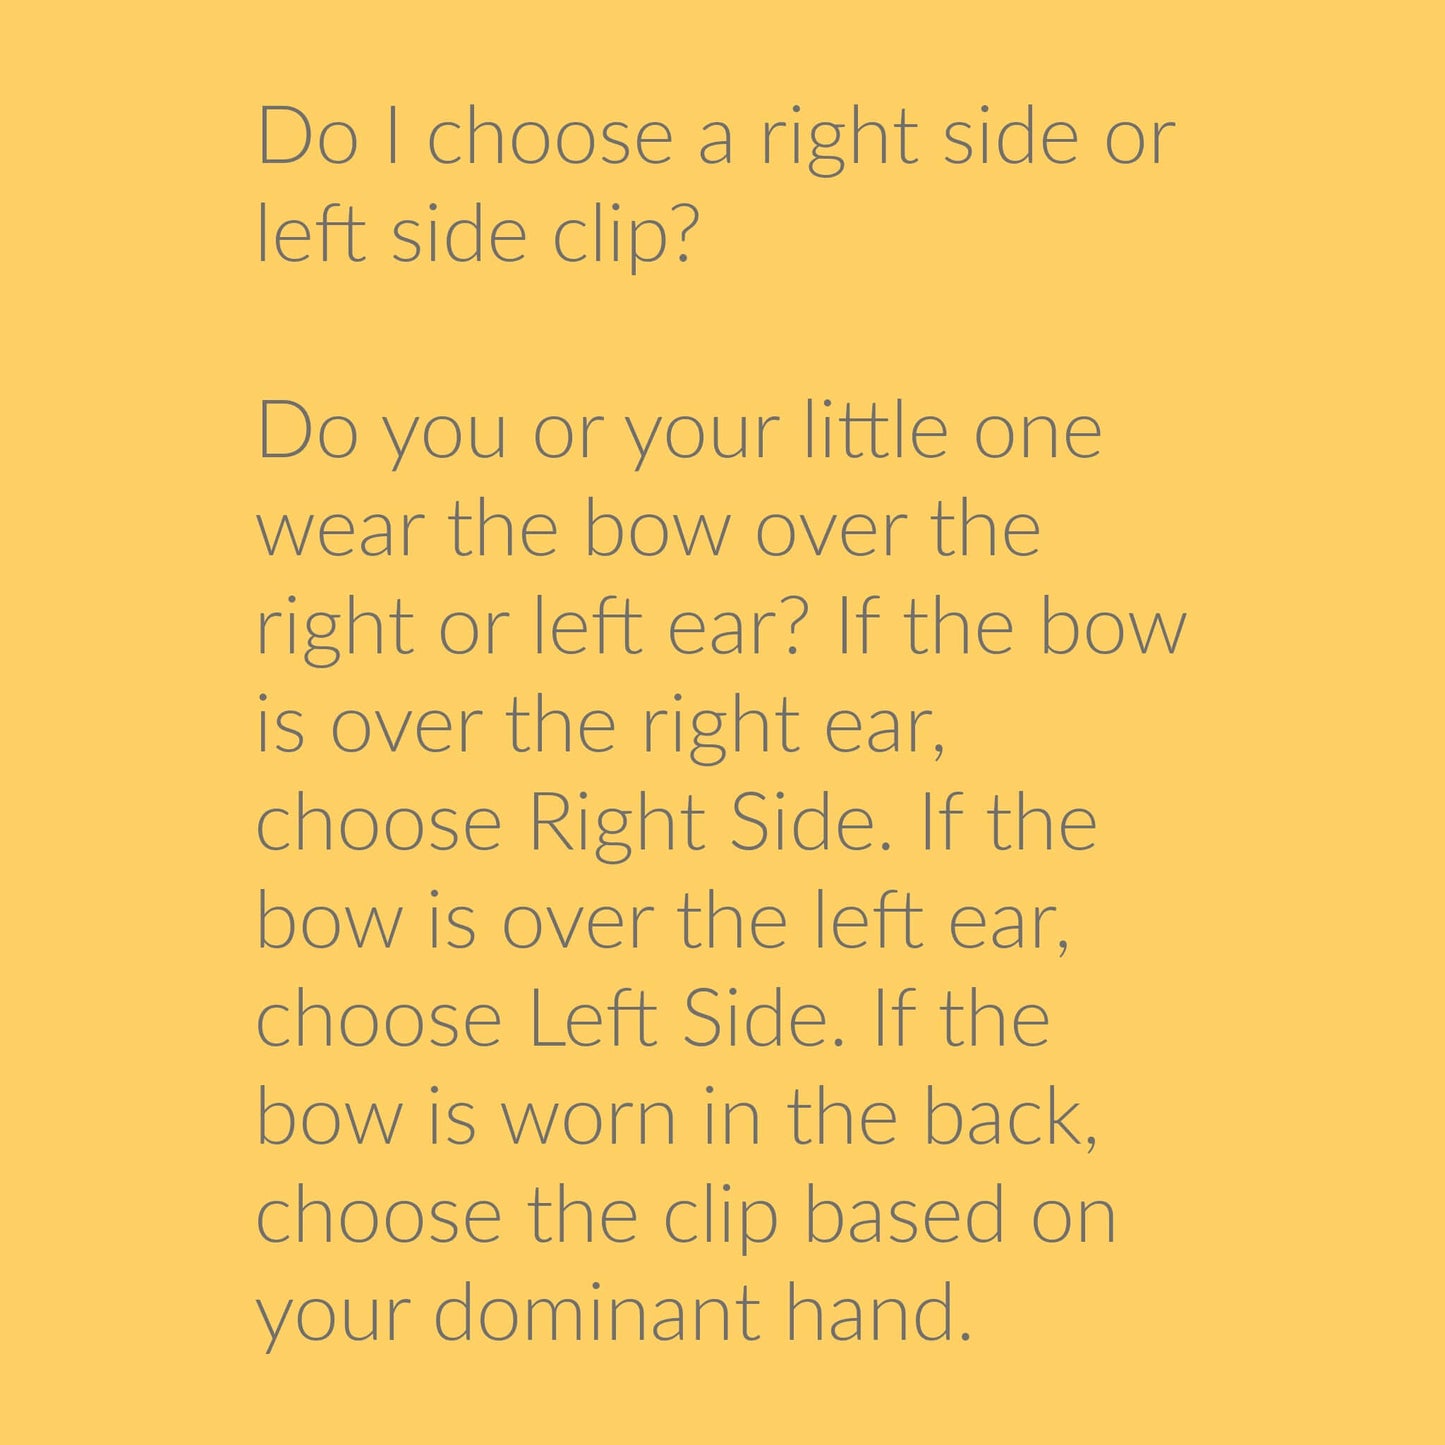 Instructions on choosing a right or left side clip for hair bows based on ear placement or dominant hand.